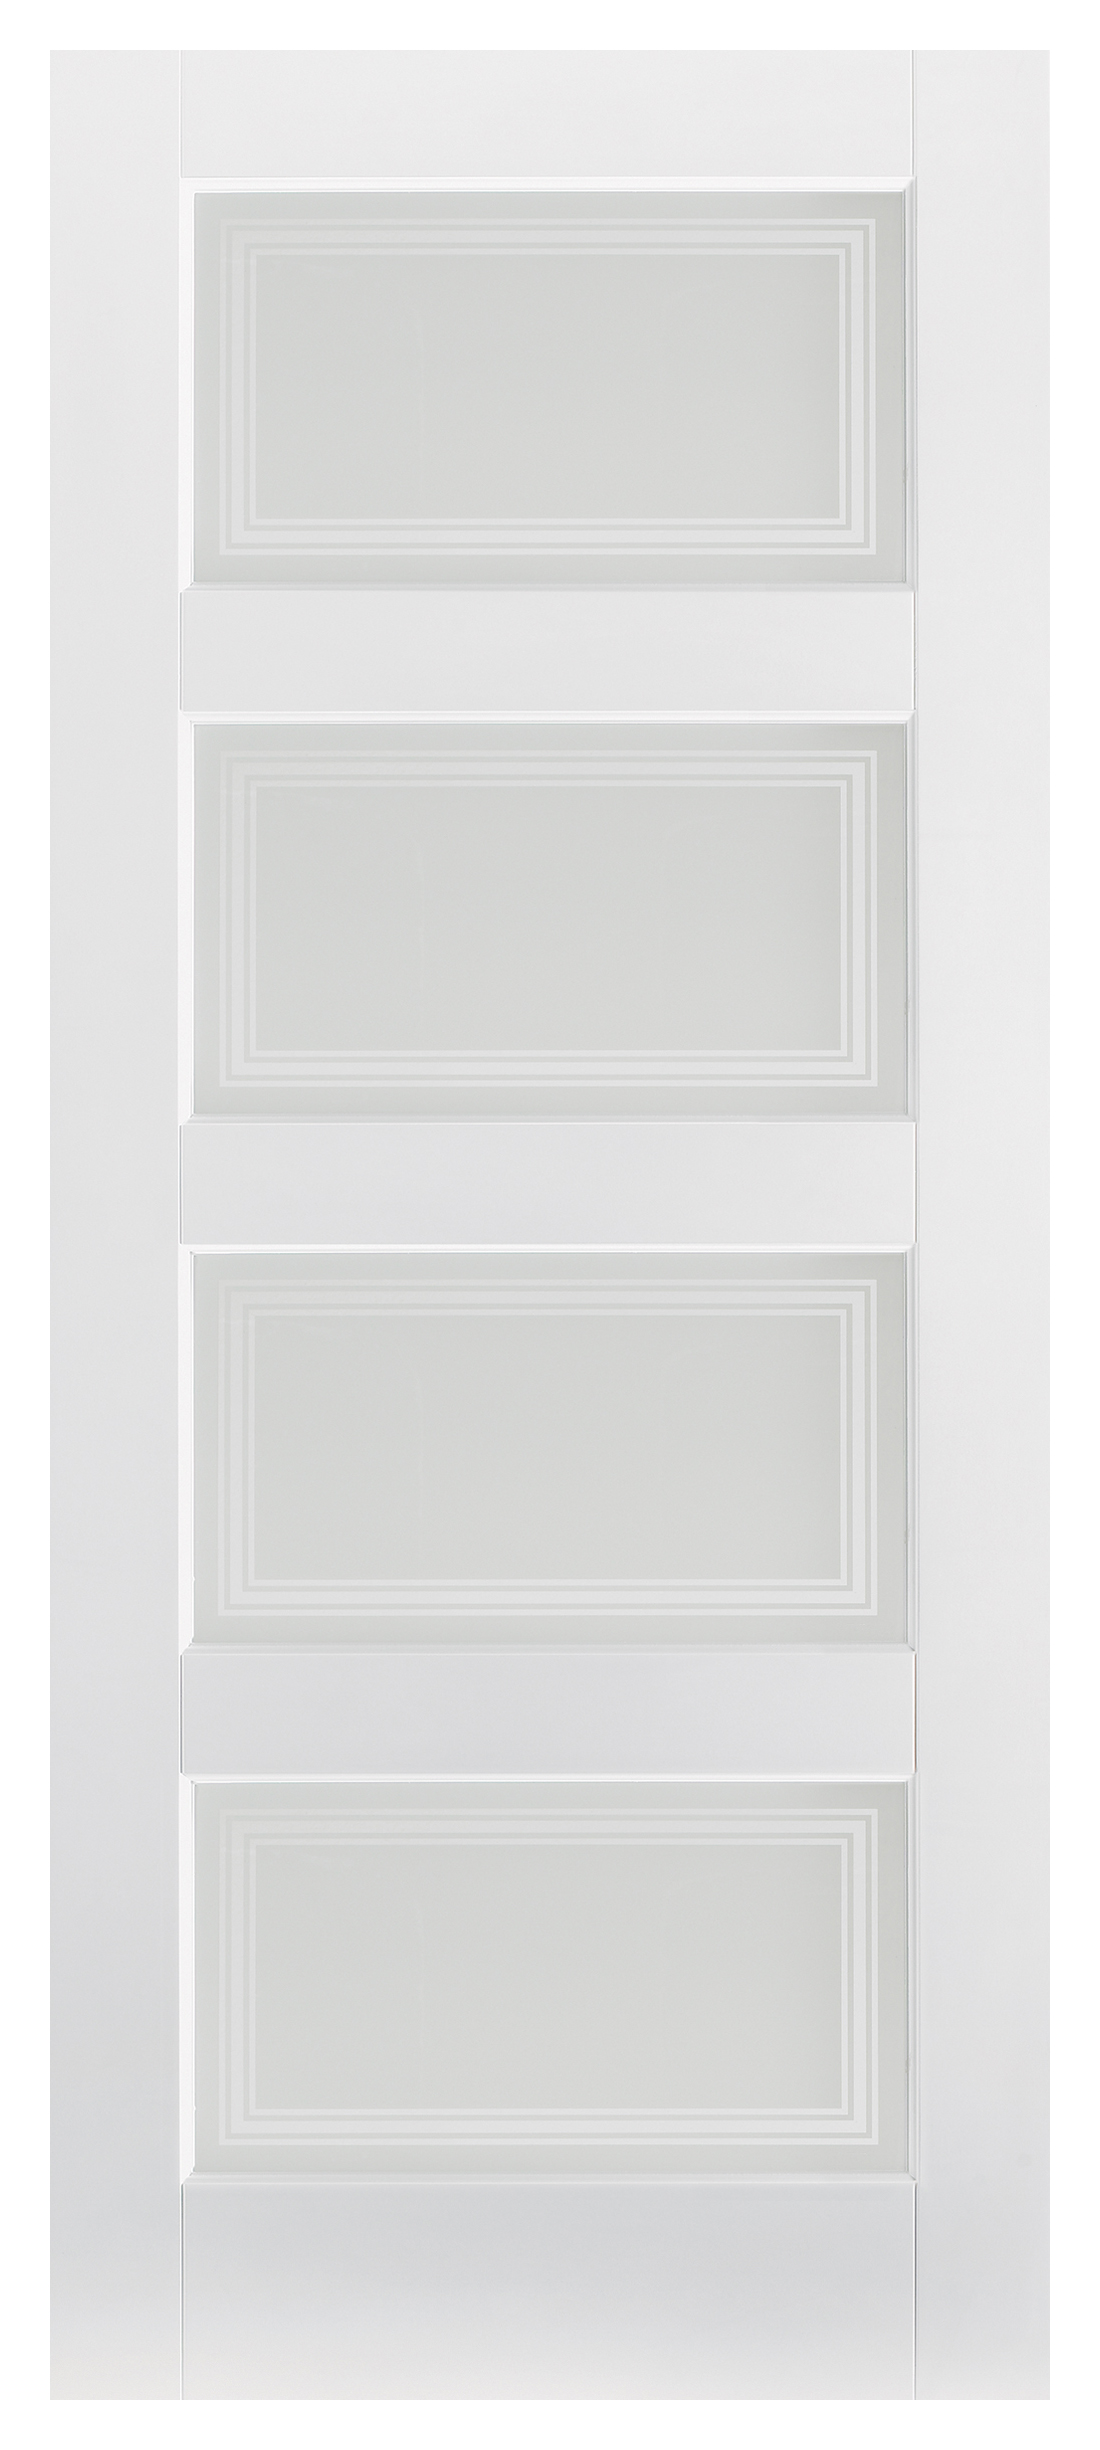 Image of LPD Internal Contemporary 4 Lite Primed White Solid Core Door - 533 x 1981mm